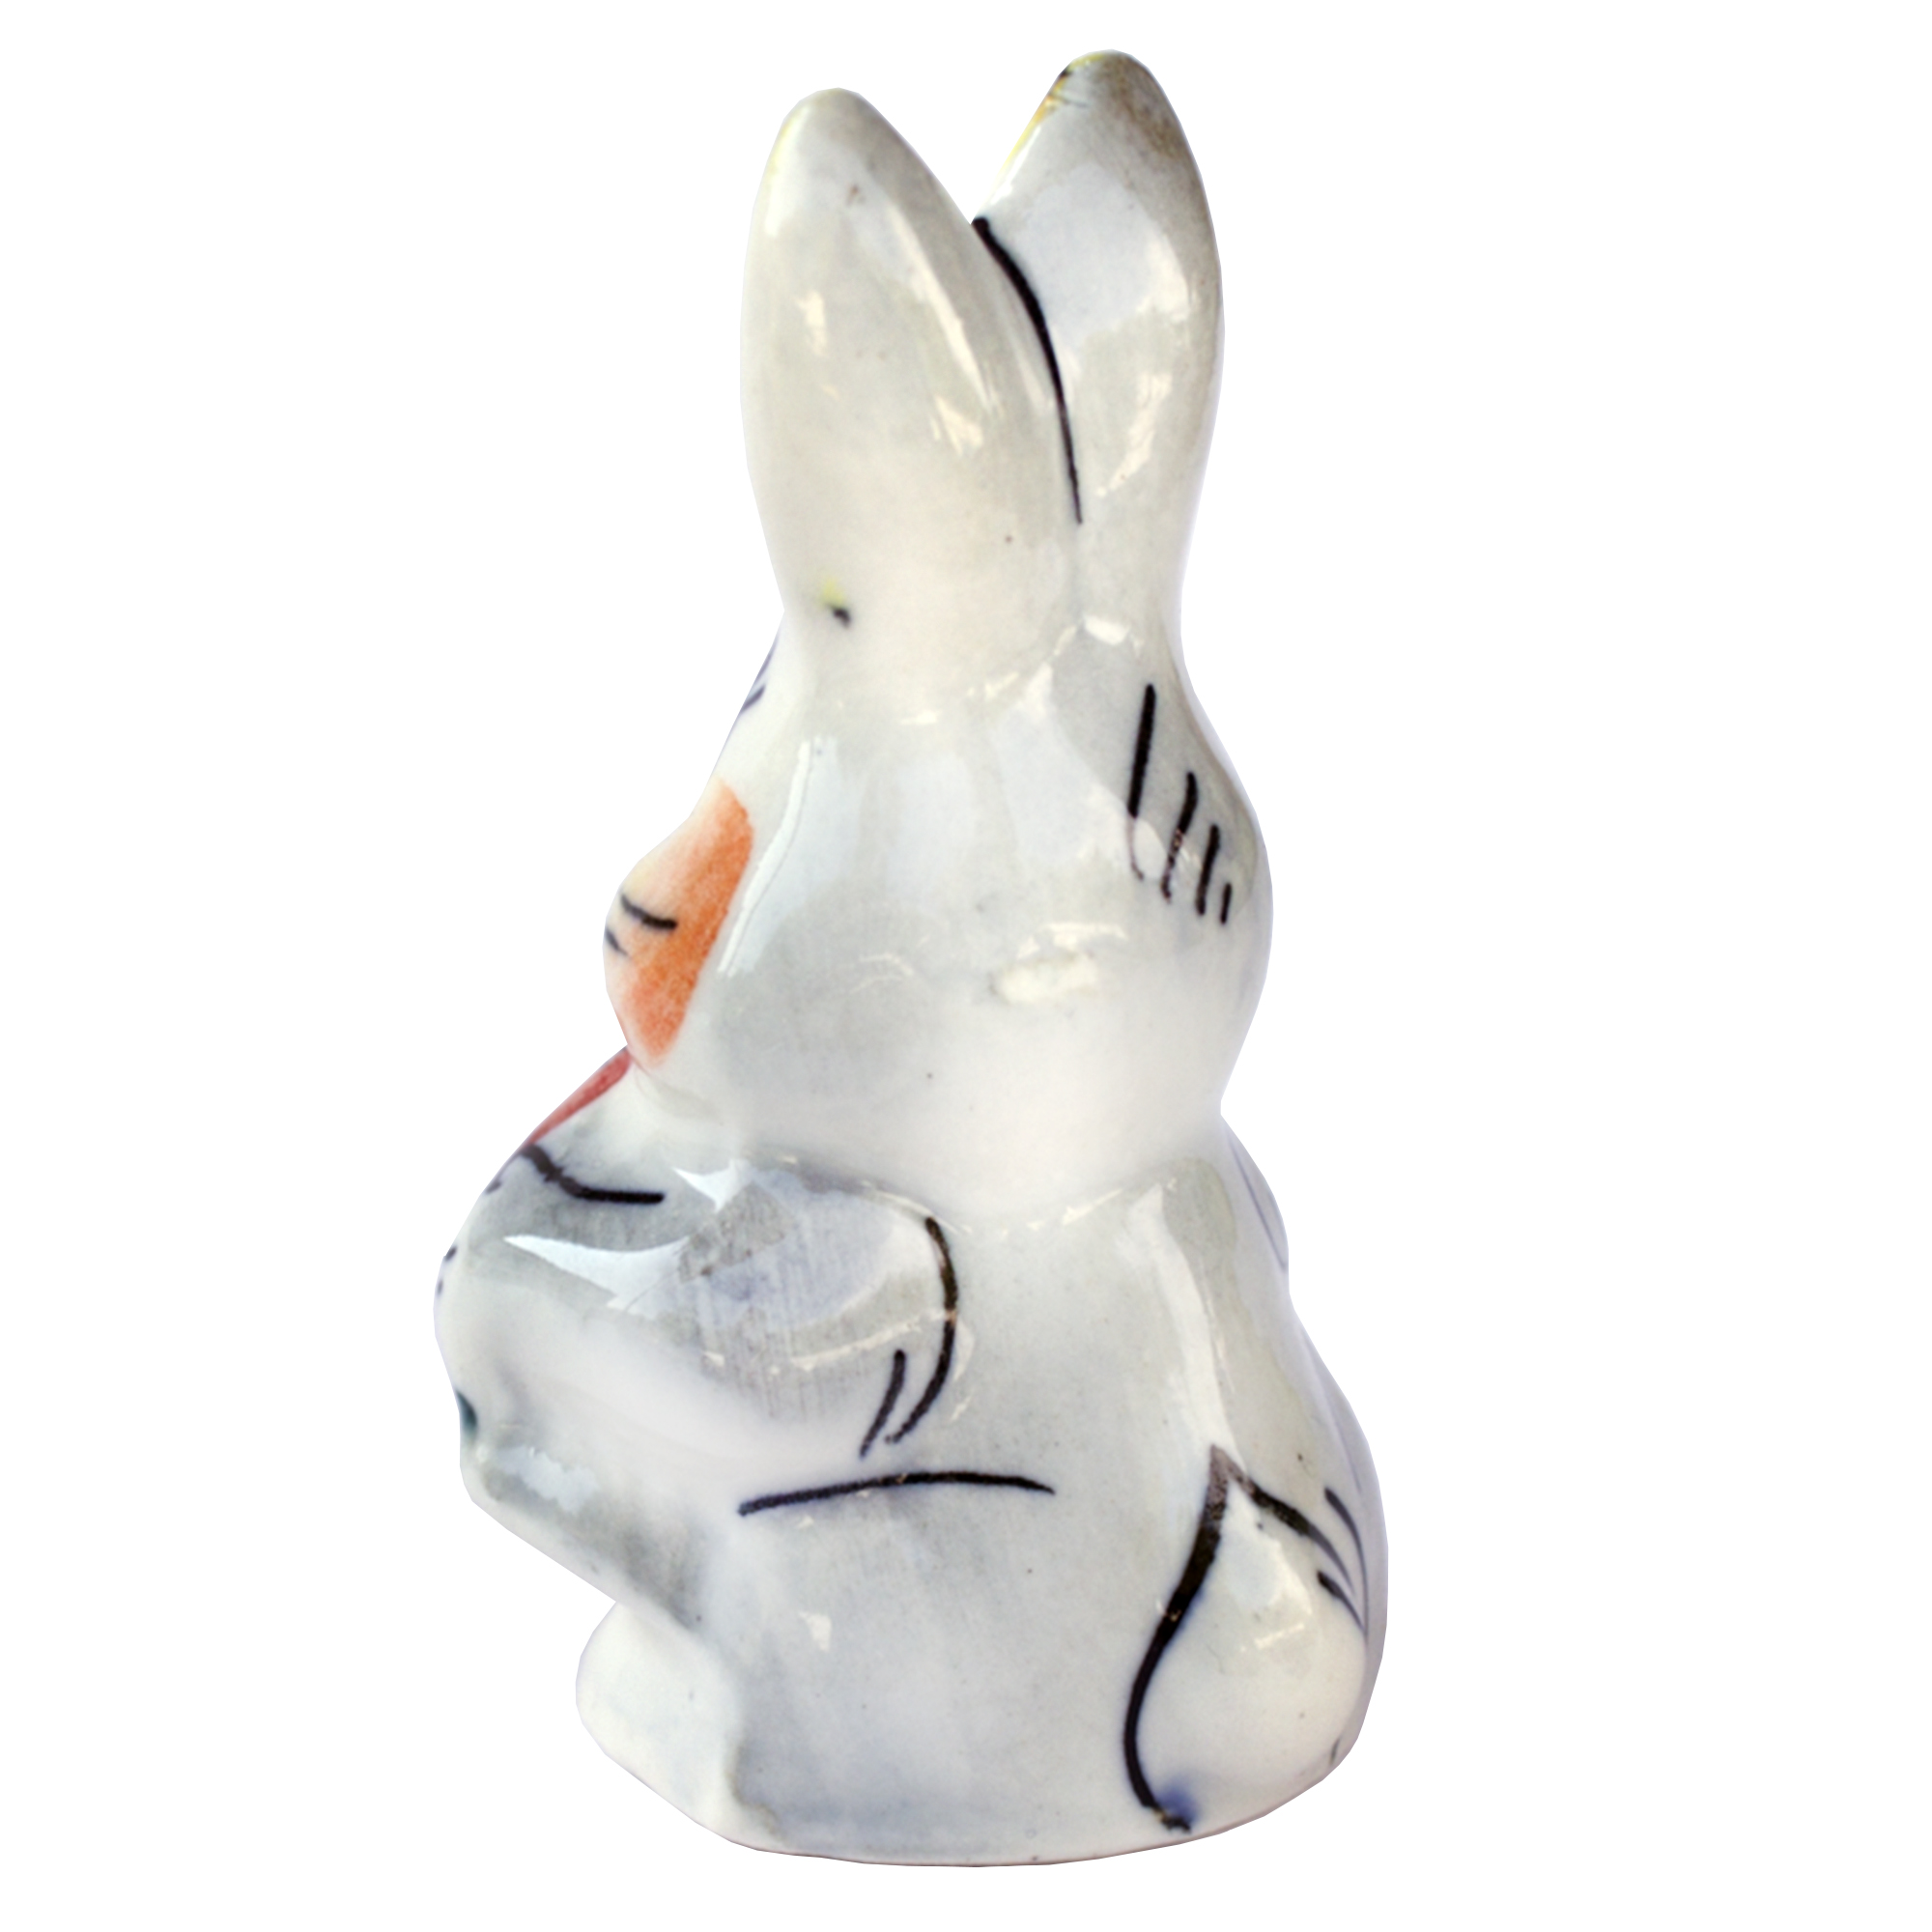 Ceramic Figurine Gzhe Colored Rabbit with Carrot, 3.9